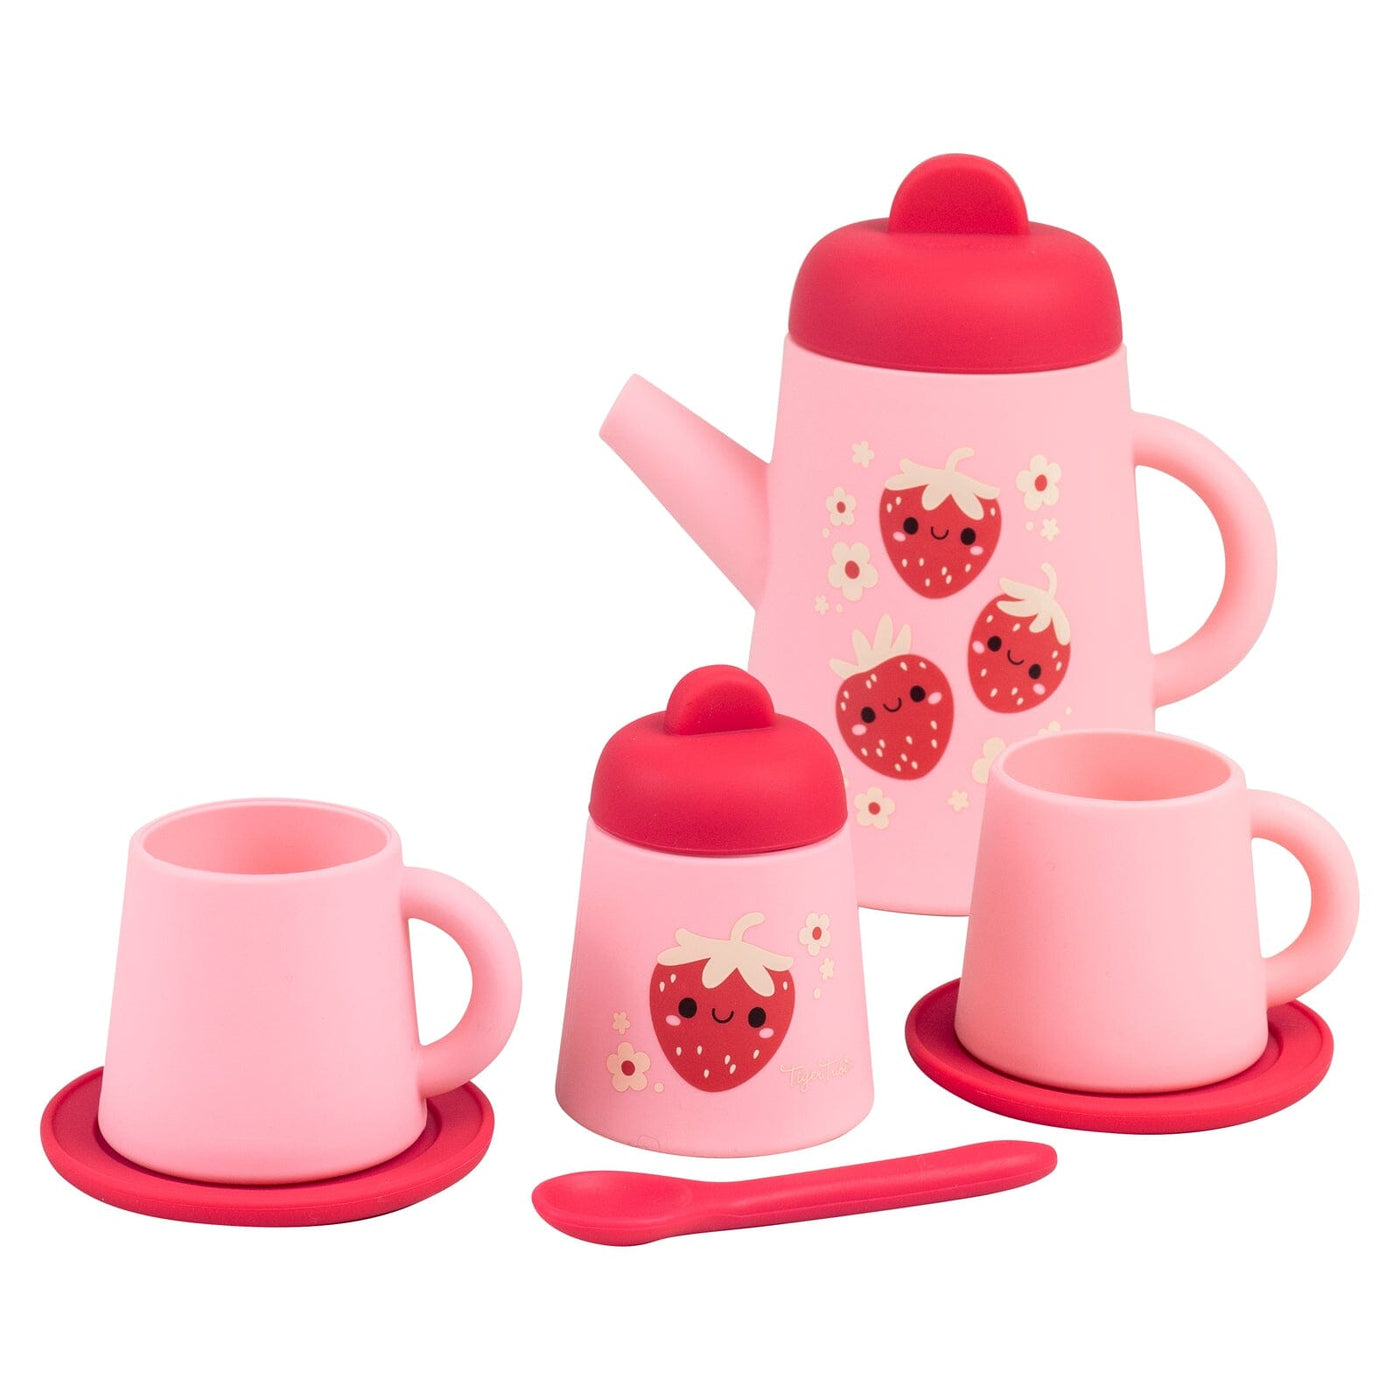 Tiger Tribe Silicone Tea Set - Strawberry Patch Toy Tiger Tribe 